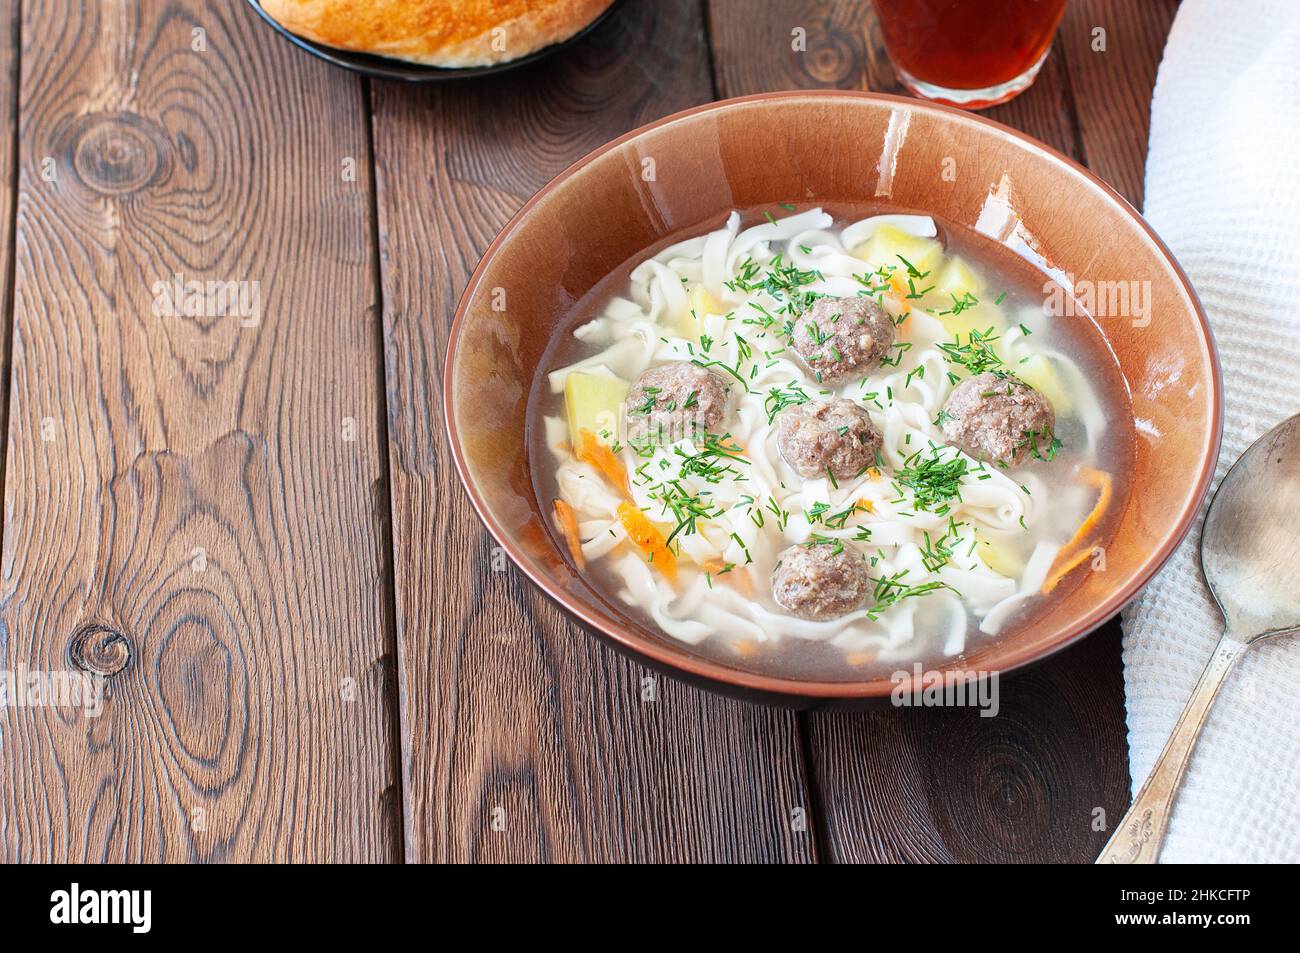 Homemade meatballs soup with noodles in a bowl on a wooden background. Stock Photo